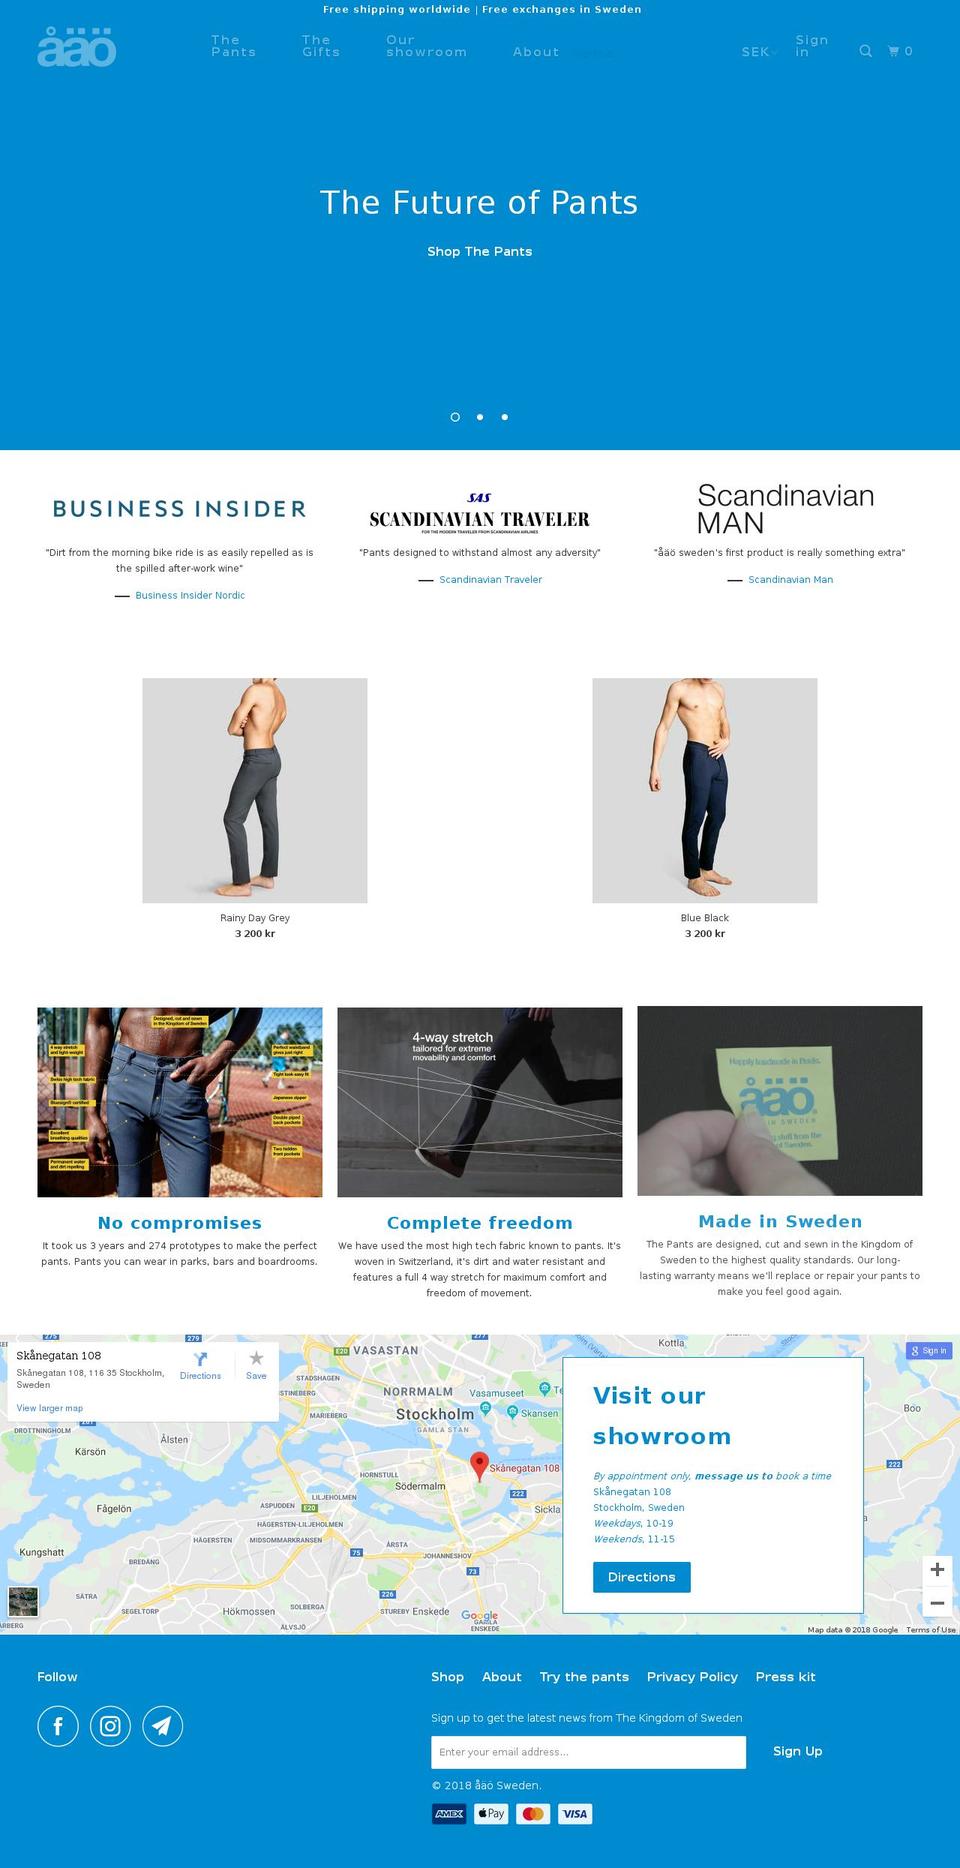 Production 20180723 Shopify theme site example aaosweden.se